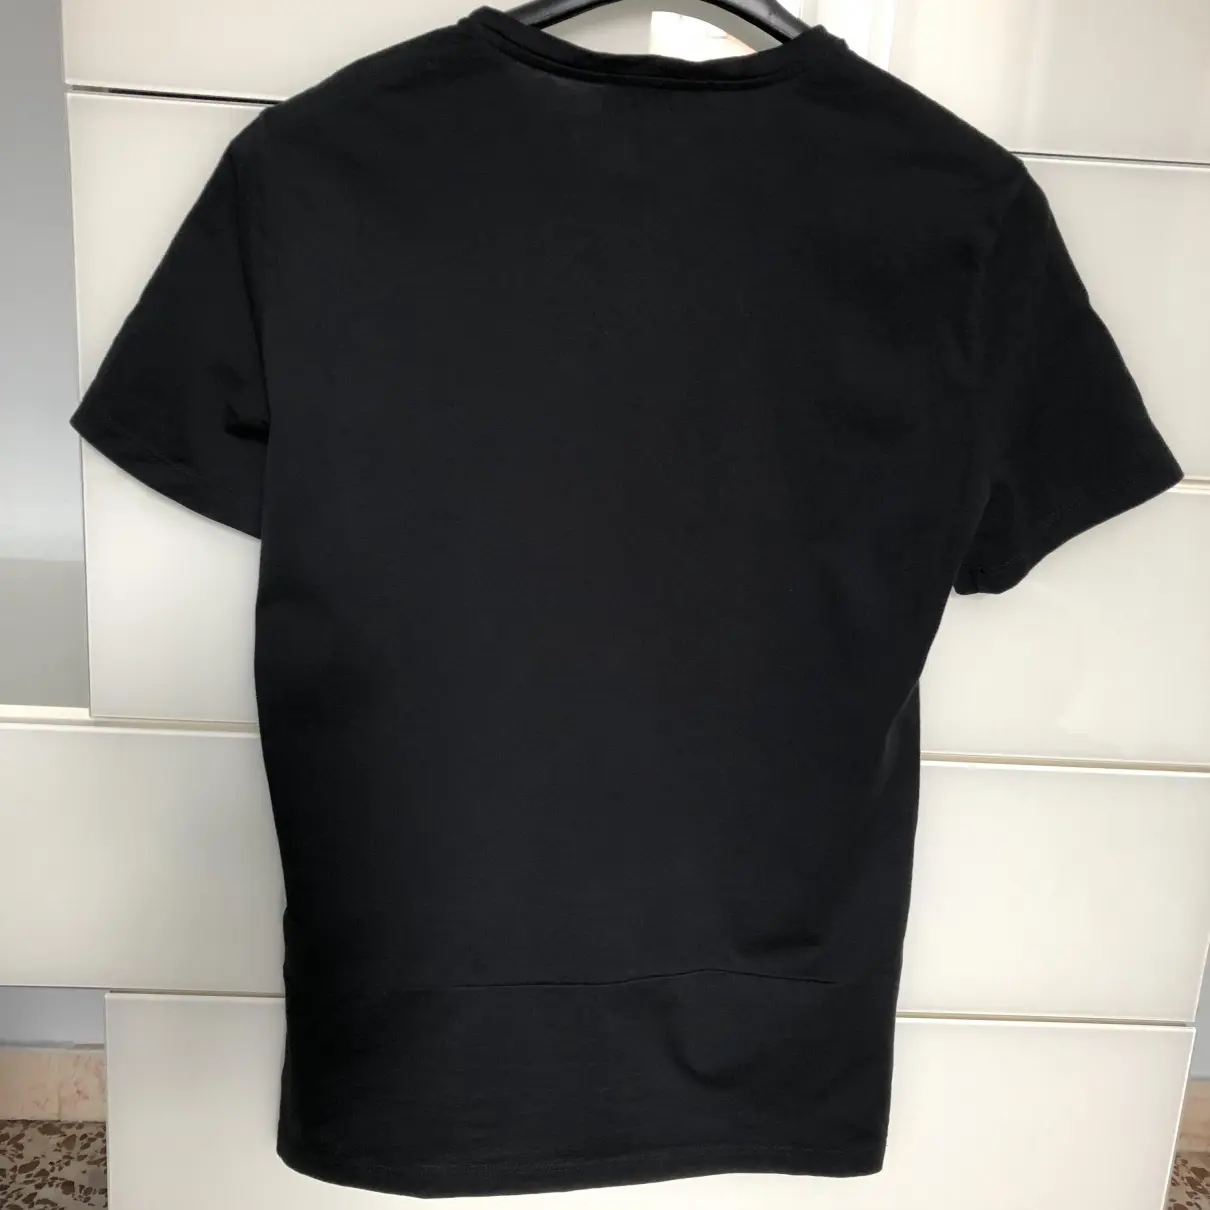 Low Brand T-shirt for sale